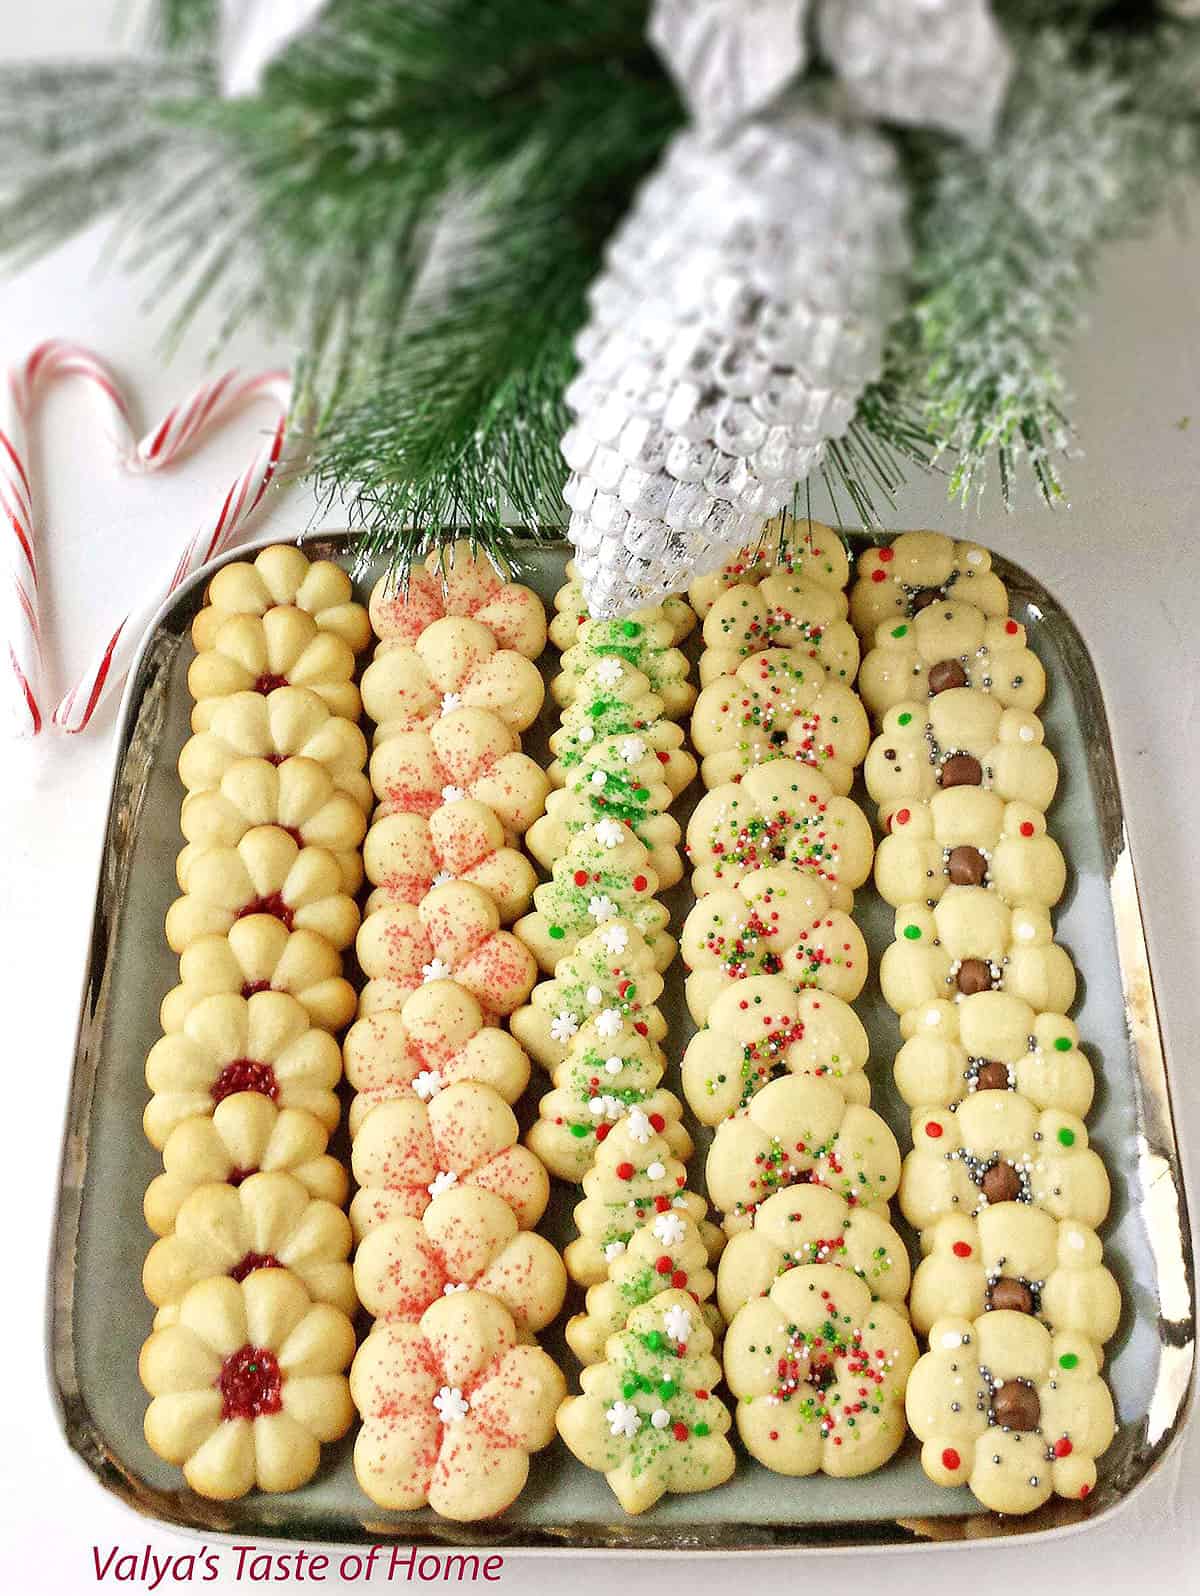 These cookies are perfect to serve to your family with some milk, or to lay out on the Christmas table for friends and family that come over!